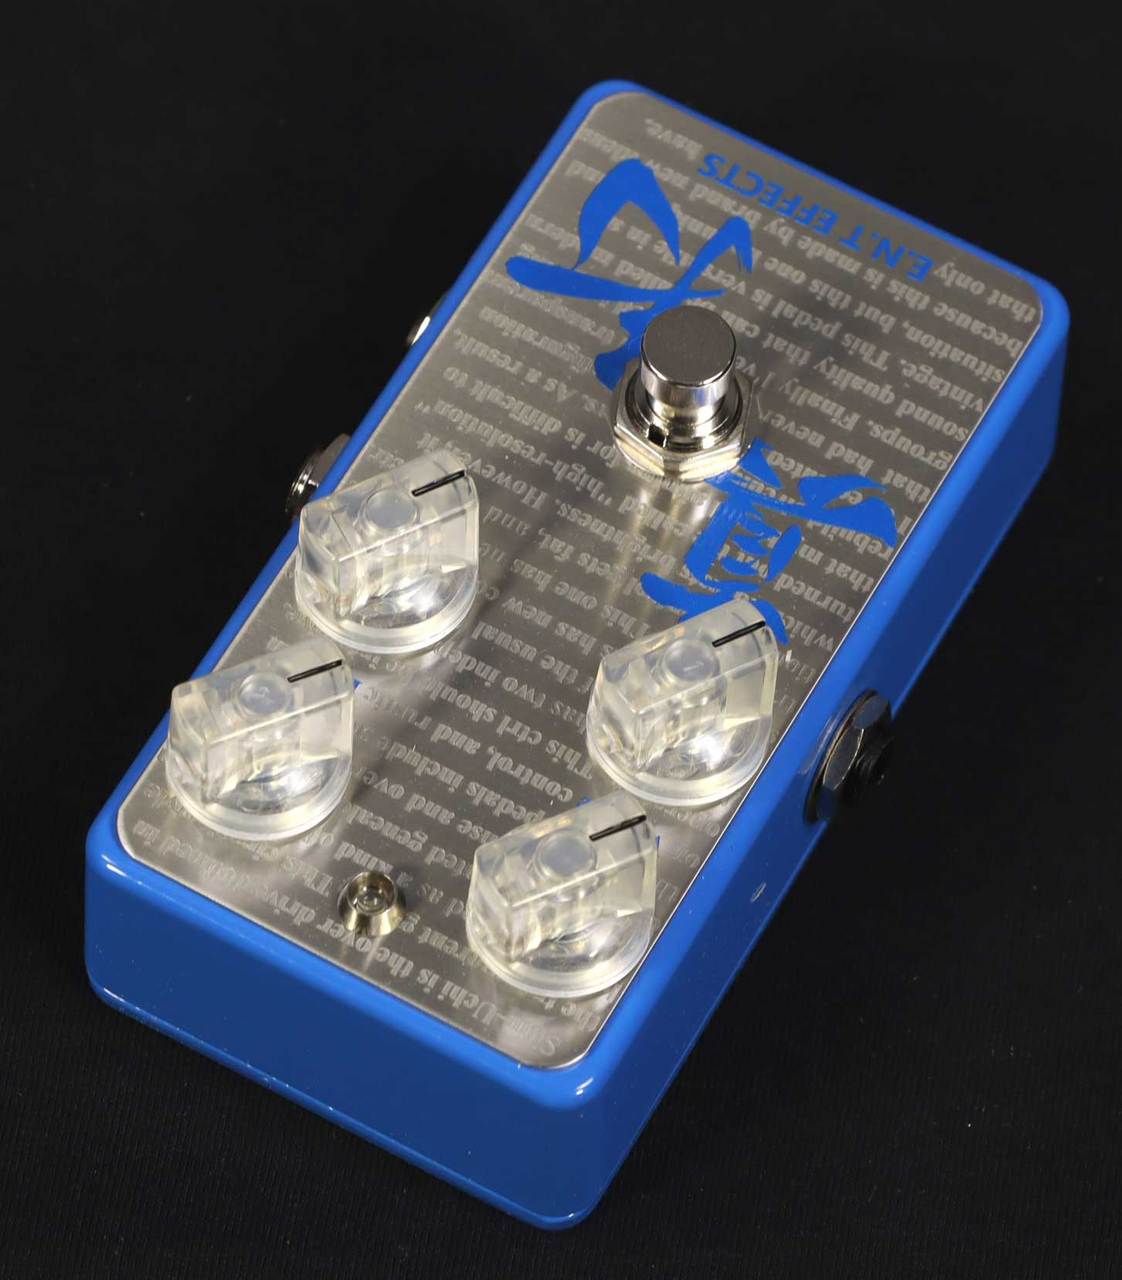 E.N.T EFFECTS ｢真打｣ Over Drive Blue Edition 【渋谷店】（新品/送料 ...